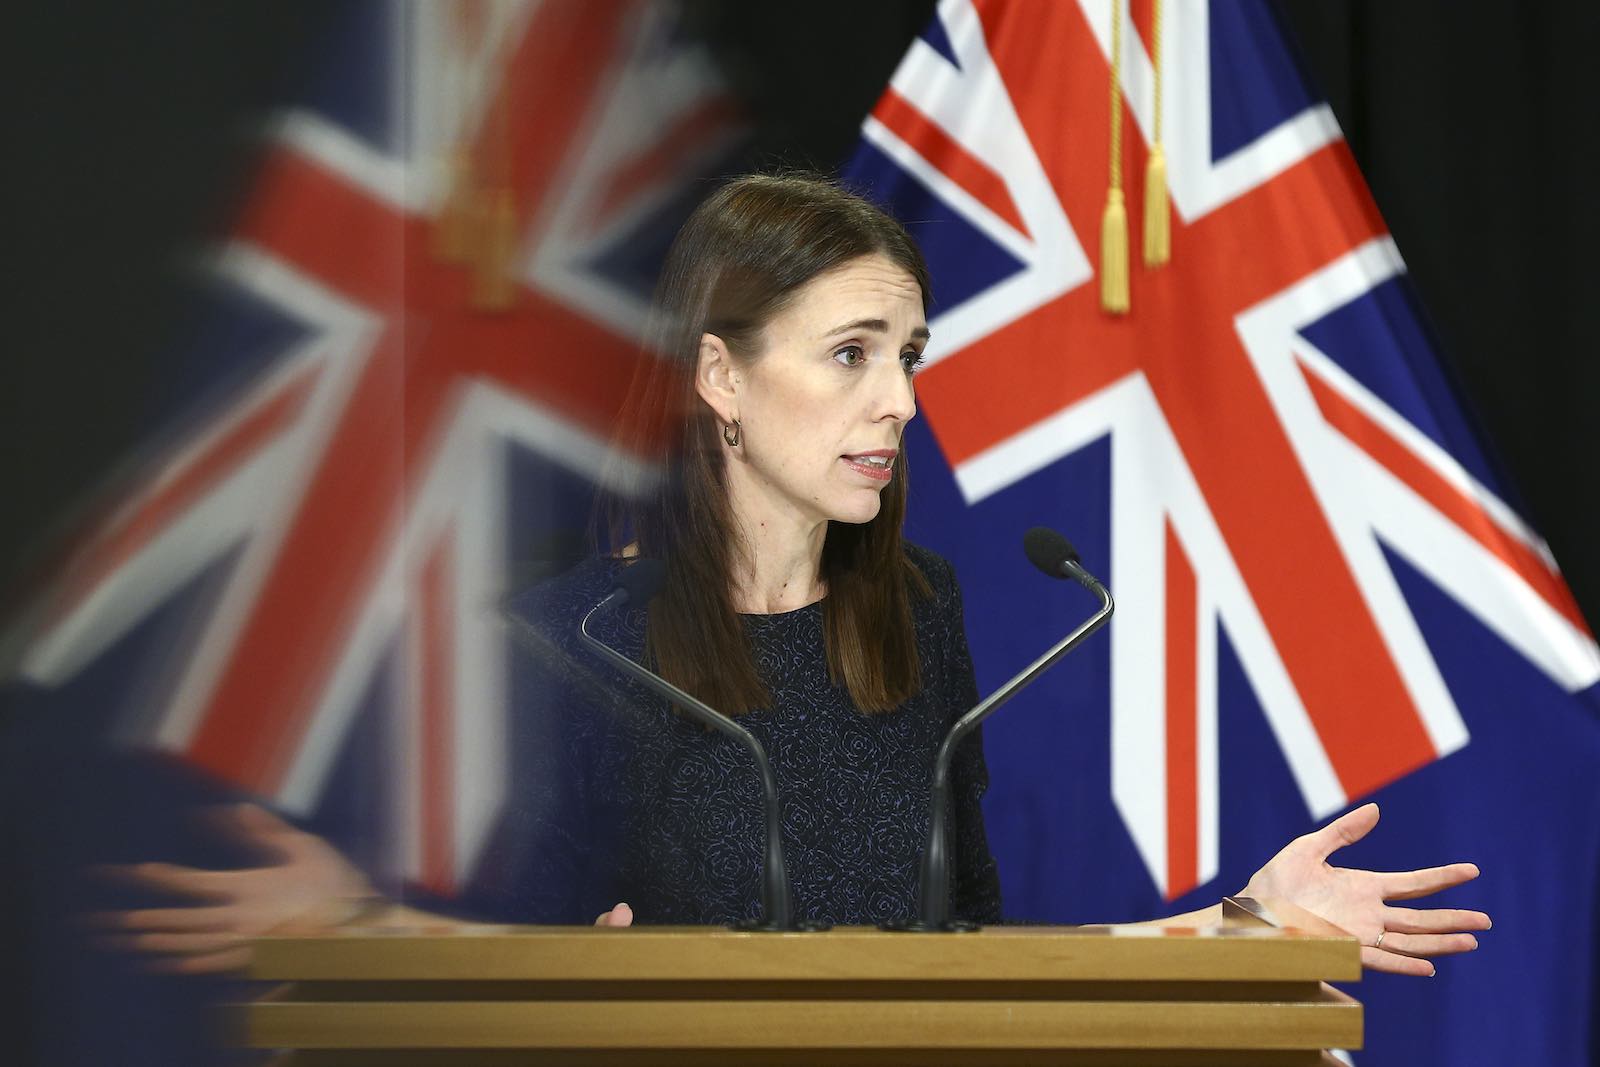 New Zealand Prime Minister Jacinda Ardern in a press conference on Tuesday to discuss a national lockdown (Hagen Hopkins/Getty Images)